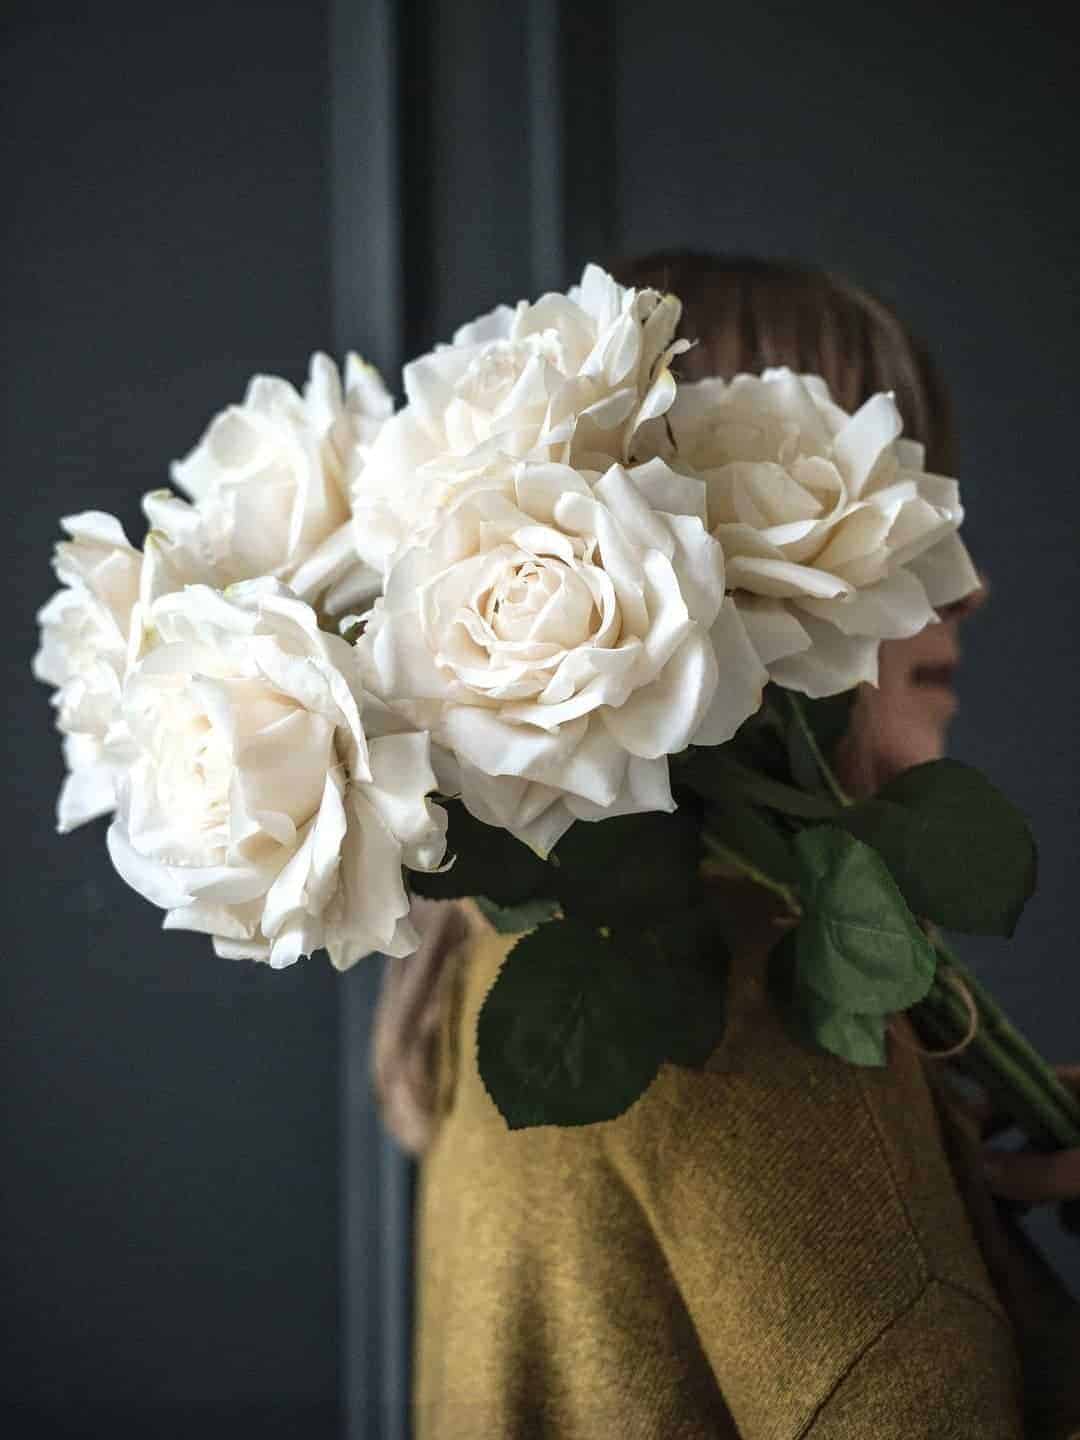 love these faux white old fashioned cabbage roses by phlippa craddock. Click through to find out more and to see other beautiful spring flower ideas you'll love